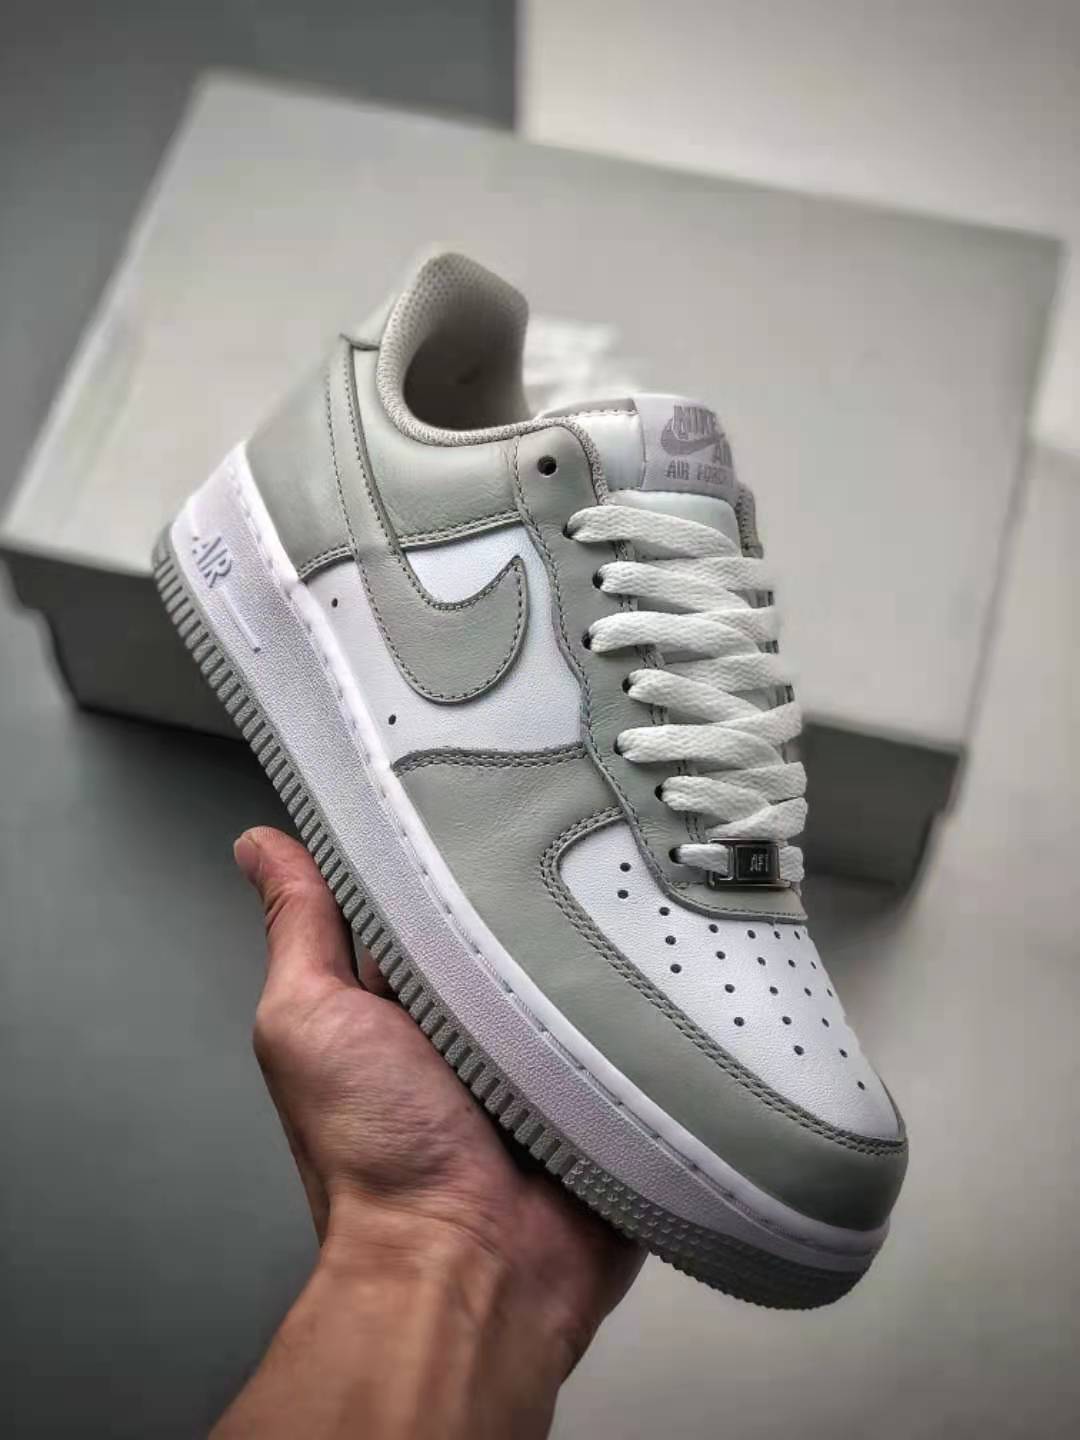 Nike Air Force 1 Low Vast Grey White AA1726-201 - Stylish and Versatile Footwear